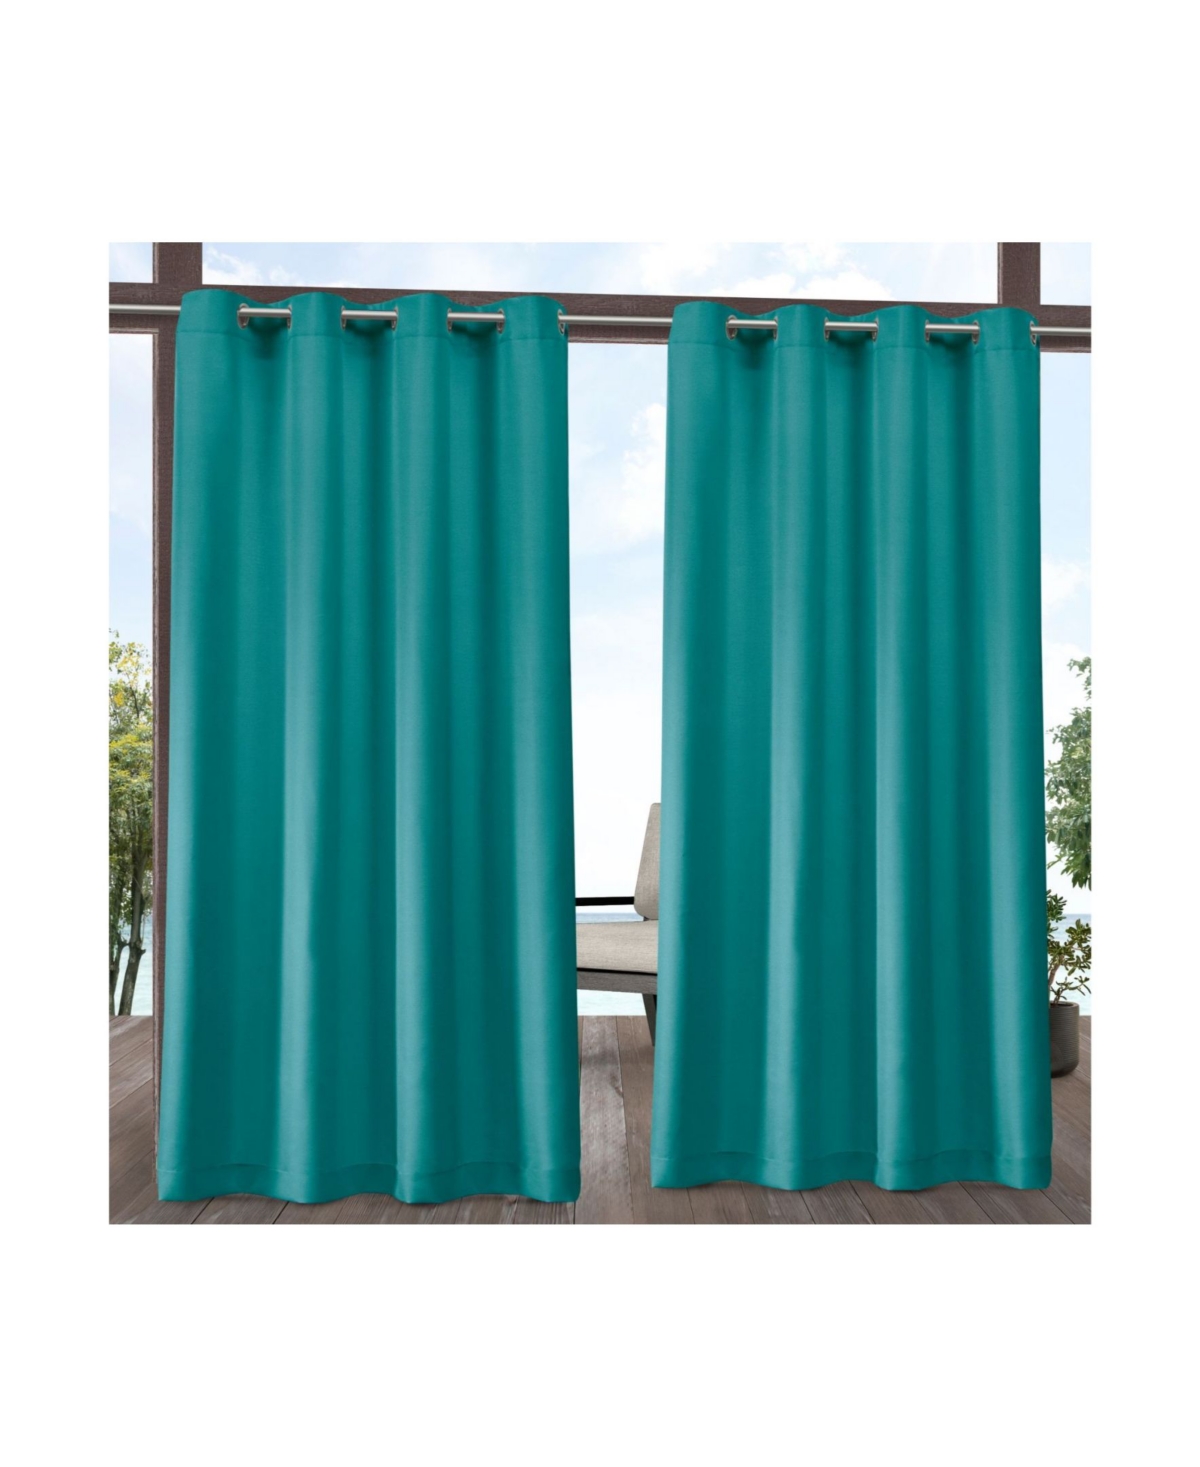 Curtains Indoor - Outdoor Solid Cabana Grommet Top Curtain Panel Pair, 54" x 108" - Green